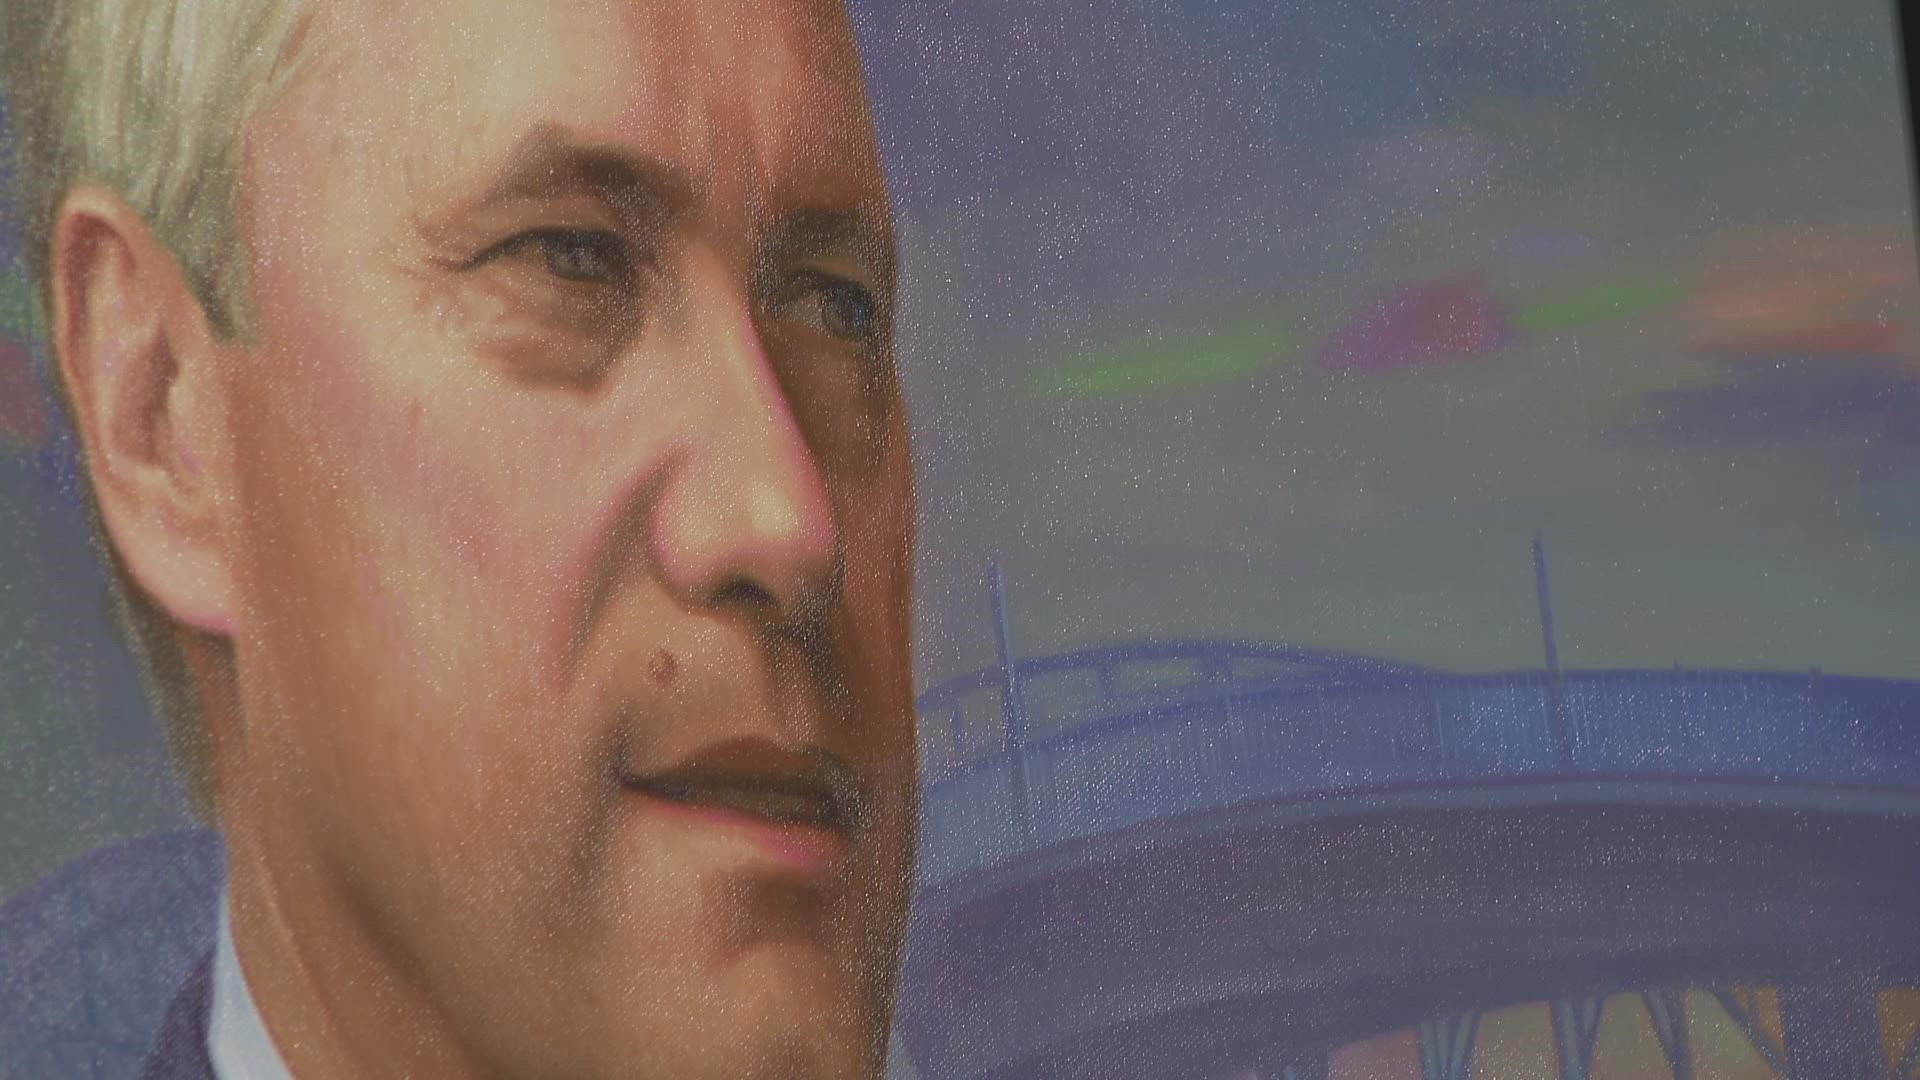 The Louisville mayor's portrait took two years to complete and will be housed in the Mayor's Gallery at Metro Hall.